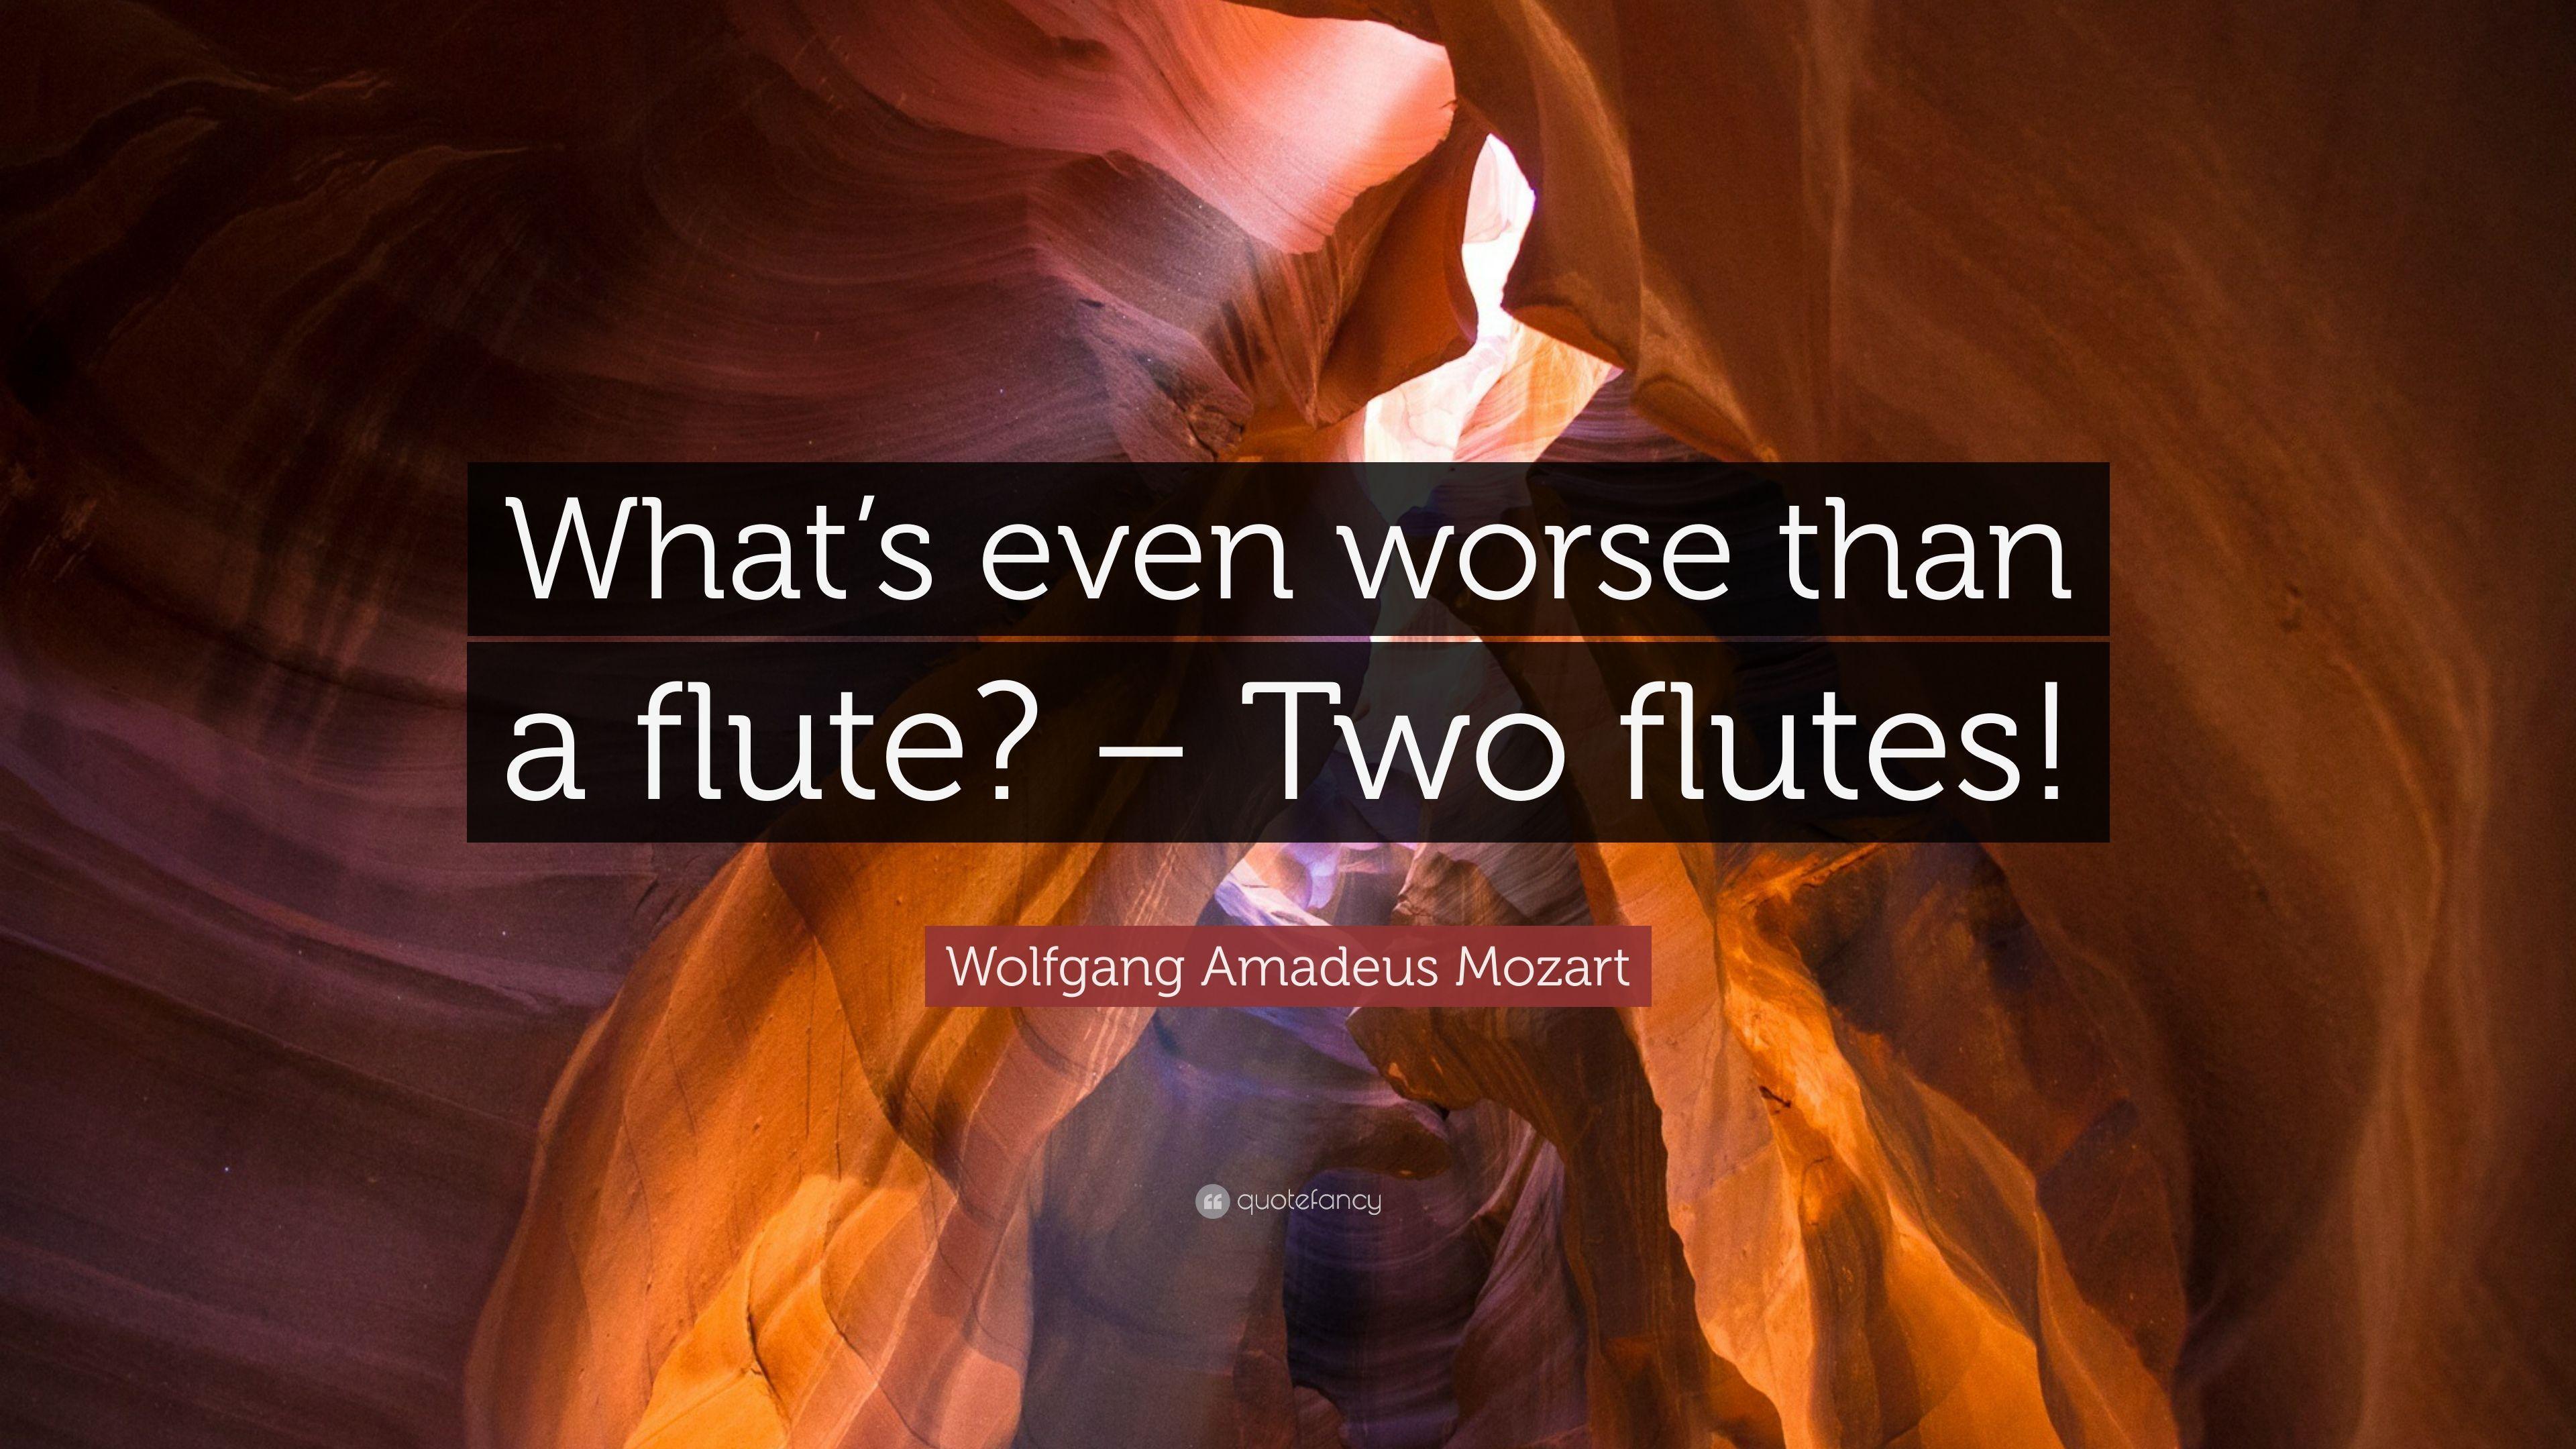 Wolfgang Amadeus Mozart Quote: “What's even worse than a flute